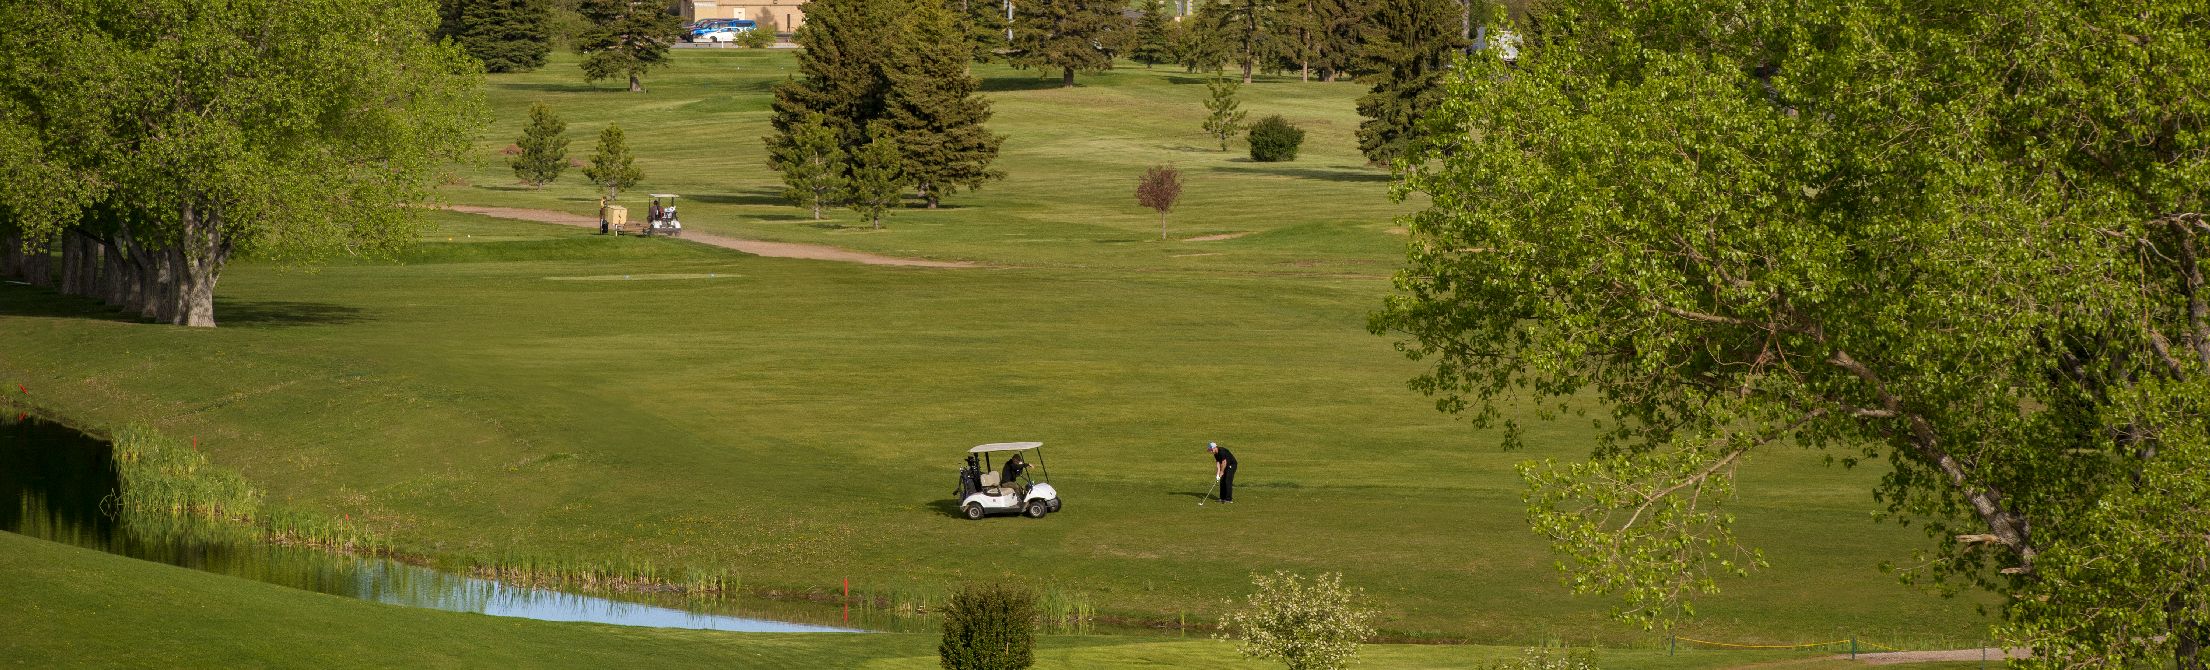 Picture of golfers on Jacoby Golf Course